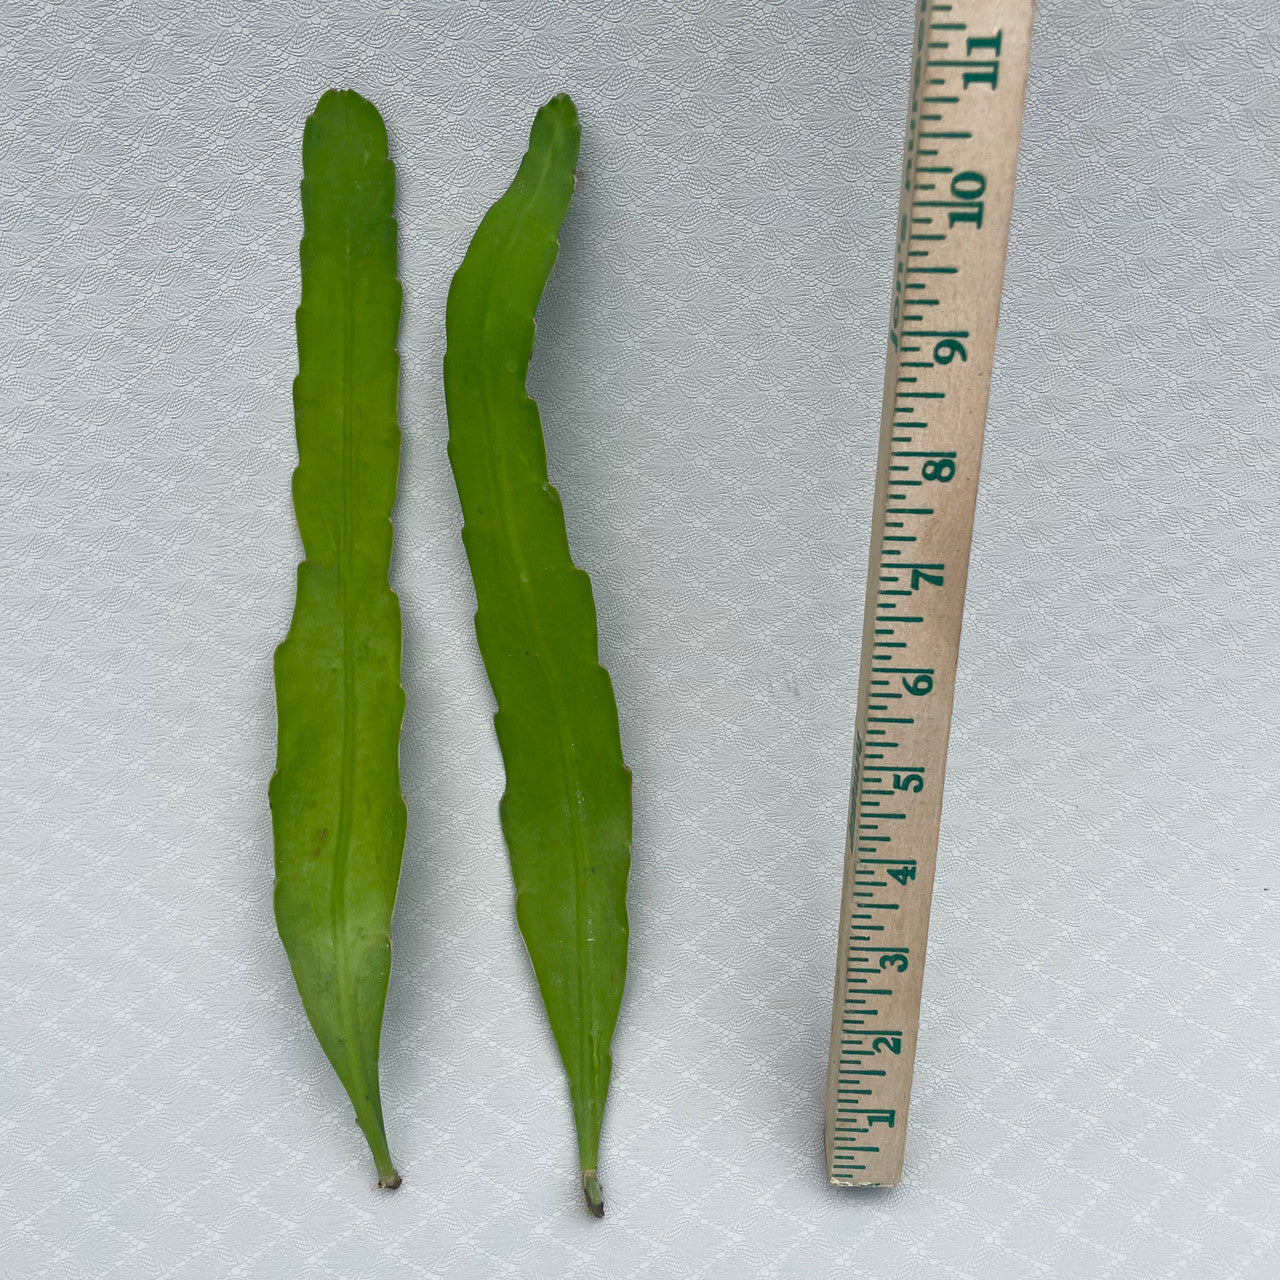 2 Epiphyllum Hookeri  (Orchid Cactus) cuttings side by side next to a measuring stick